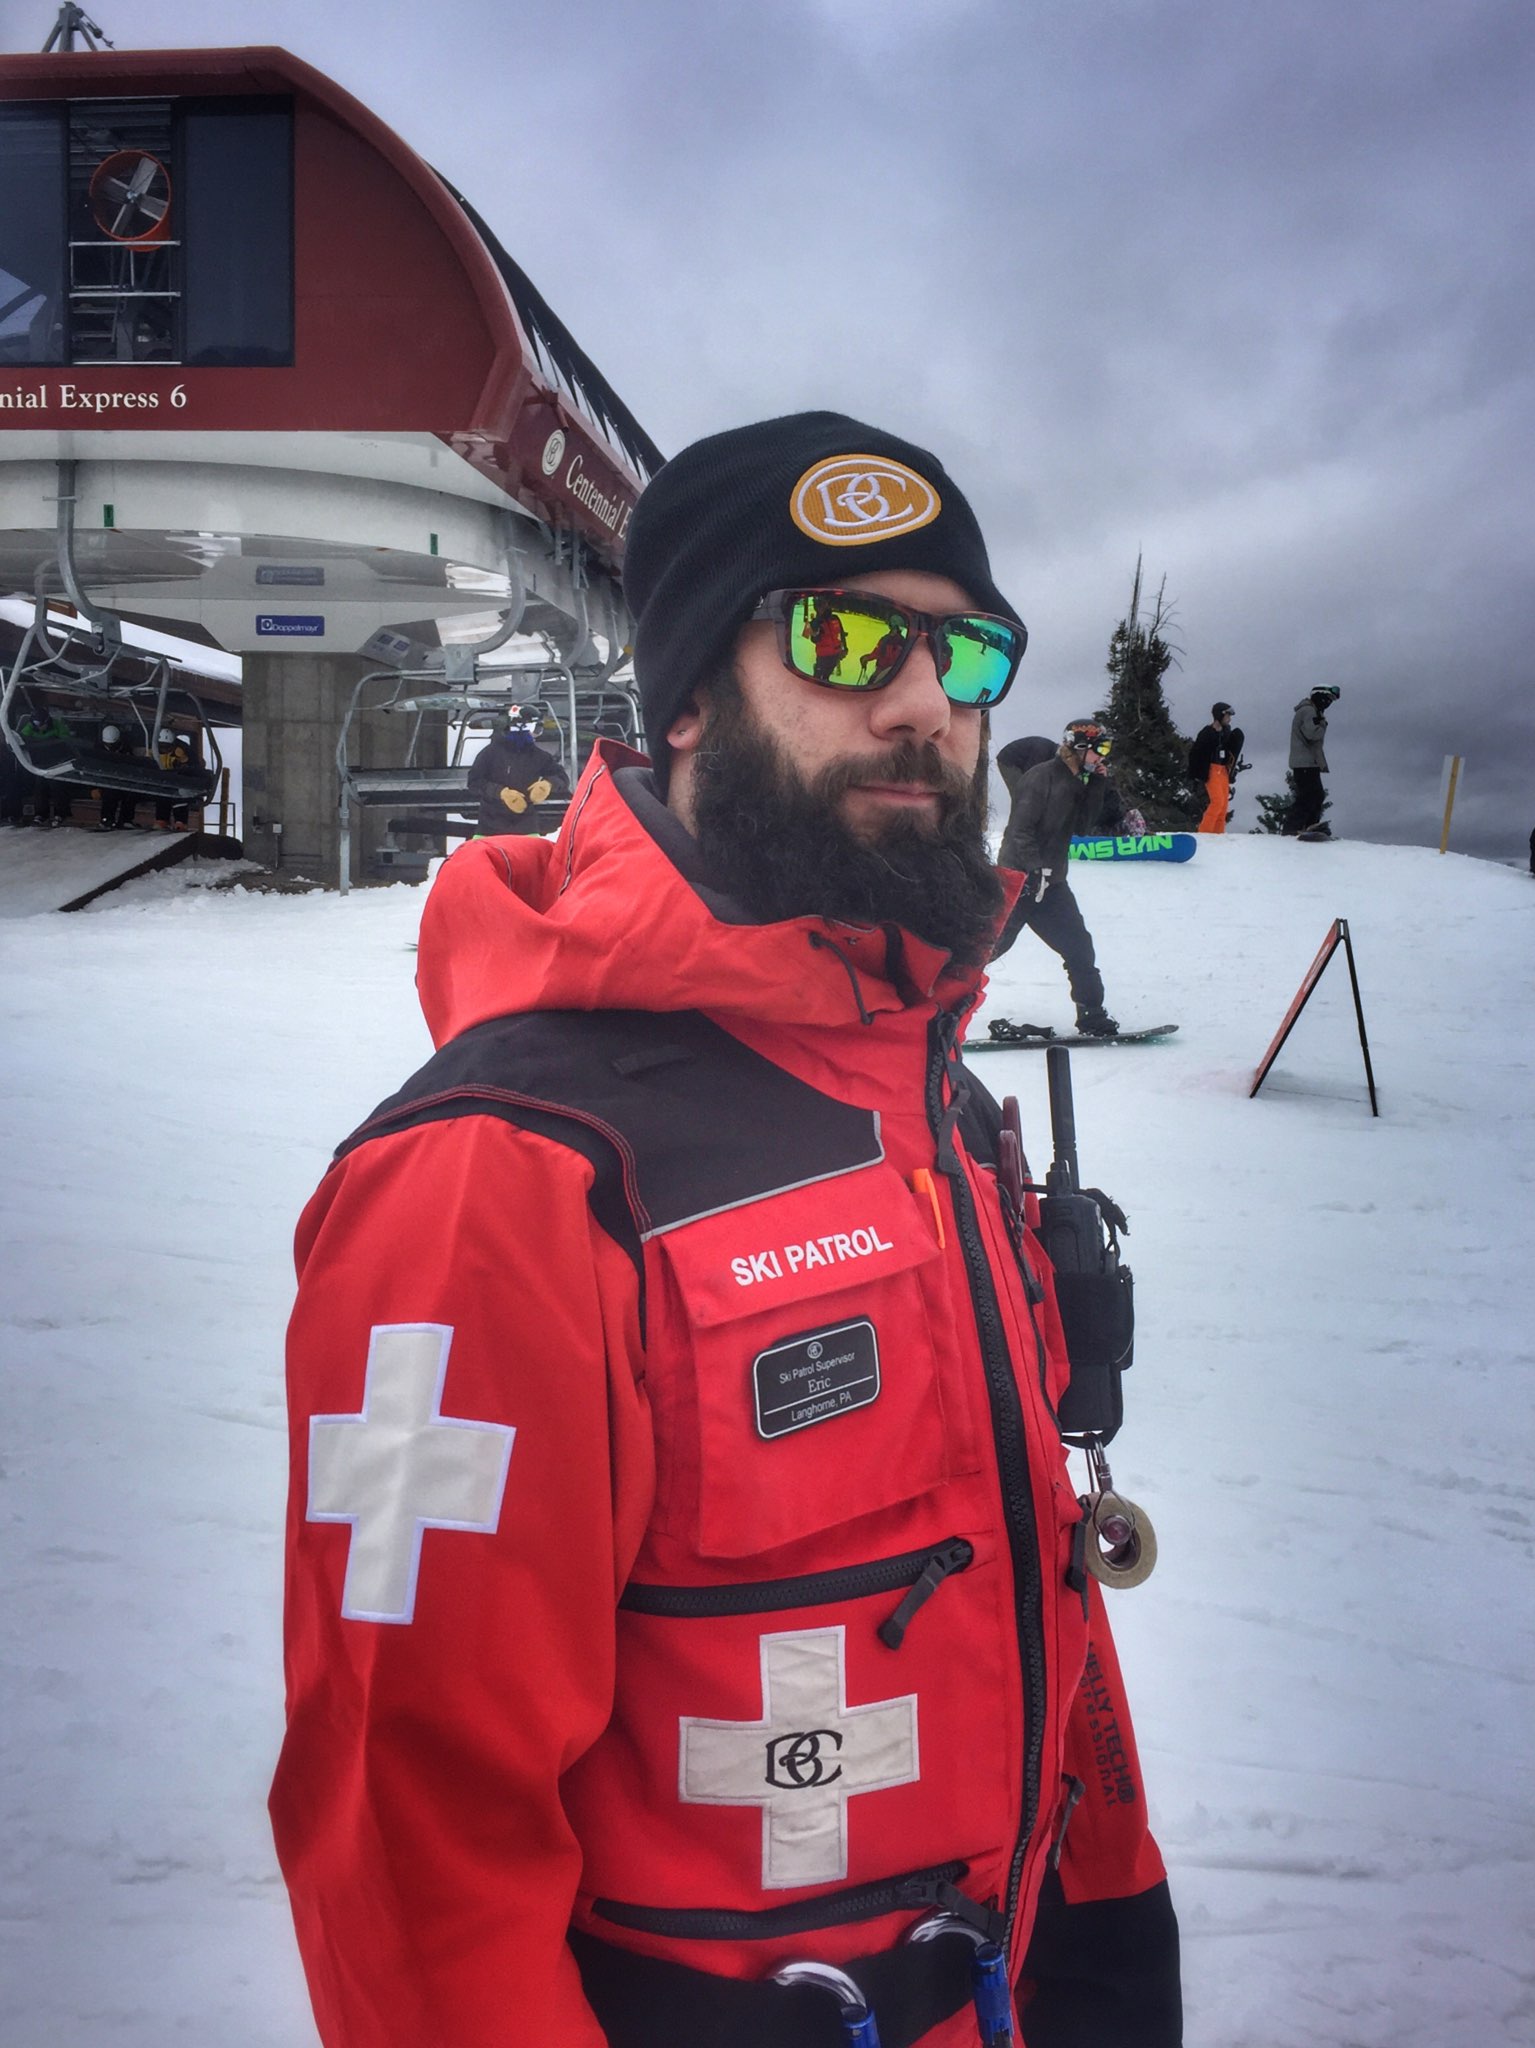 Eric McCue is a member of Beaver Creek Ski Patrol and an Avalanche Science student at Colorado Mountain College